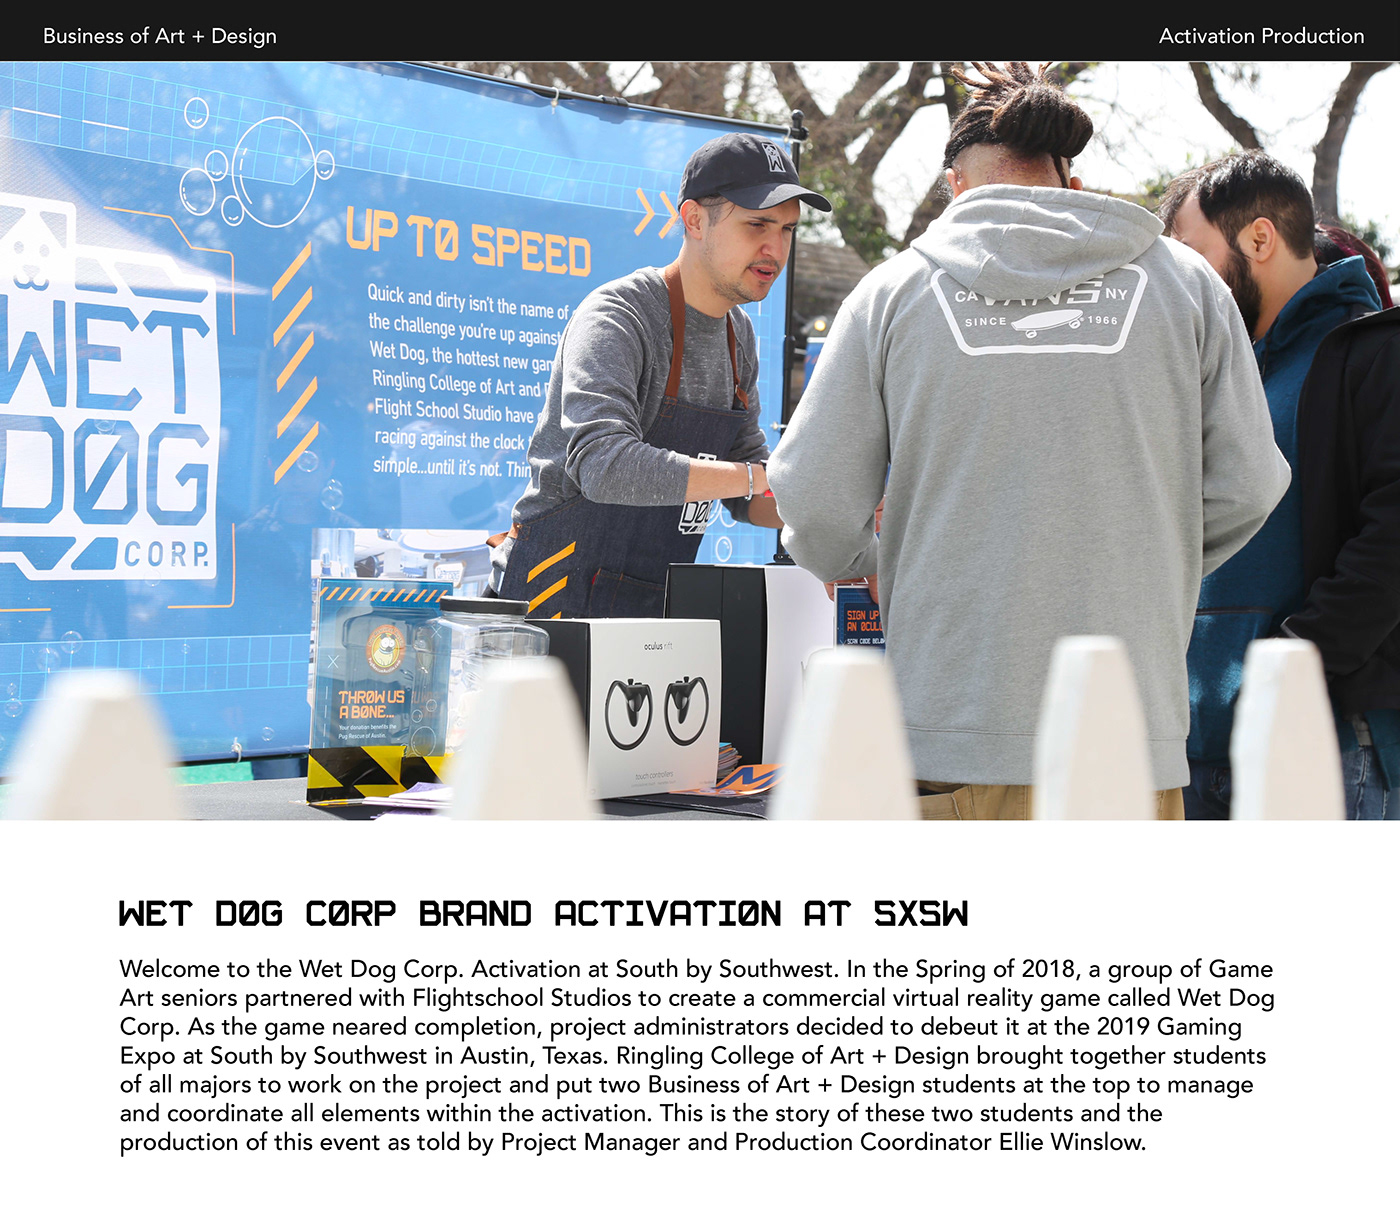 activation Brand Actication Event Event Design sxsw Virtual reality Wet Dog Corp